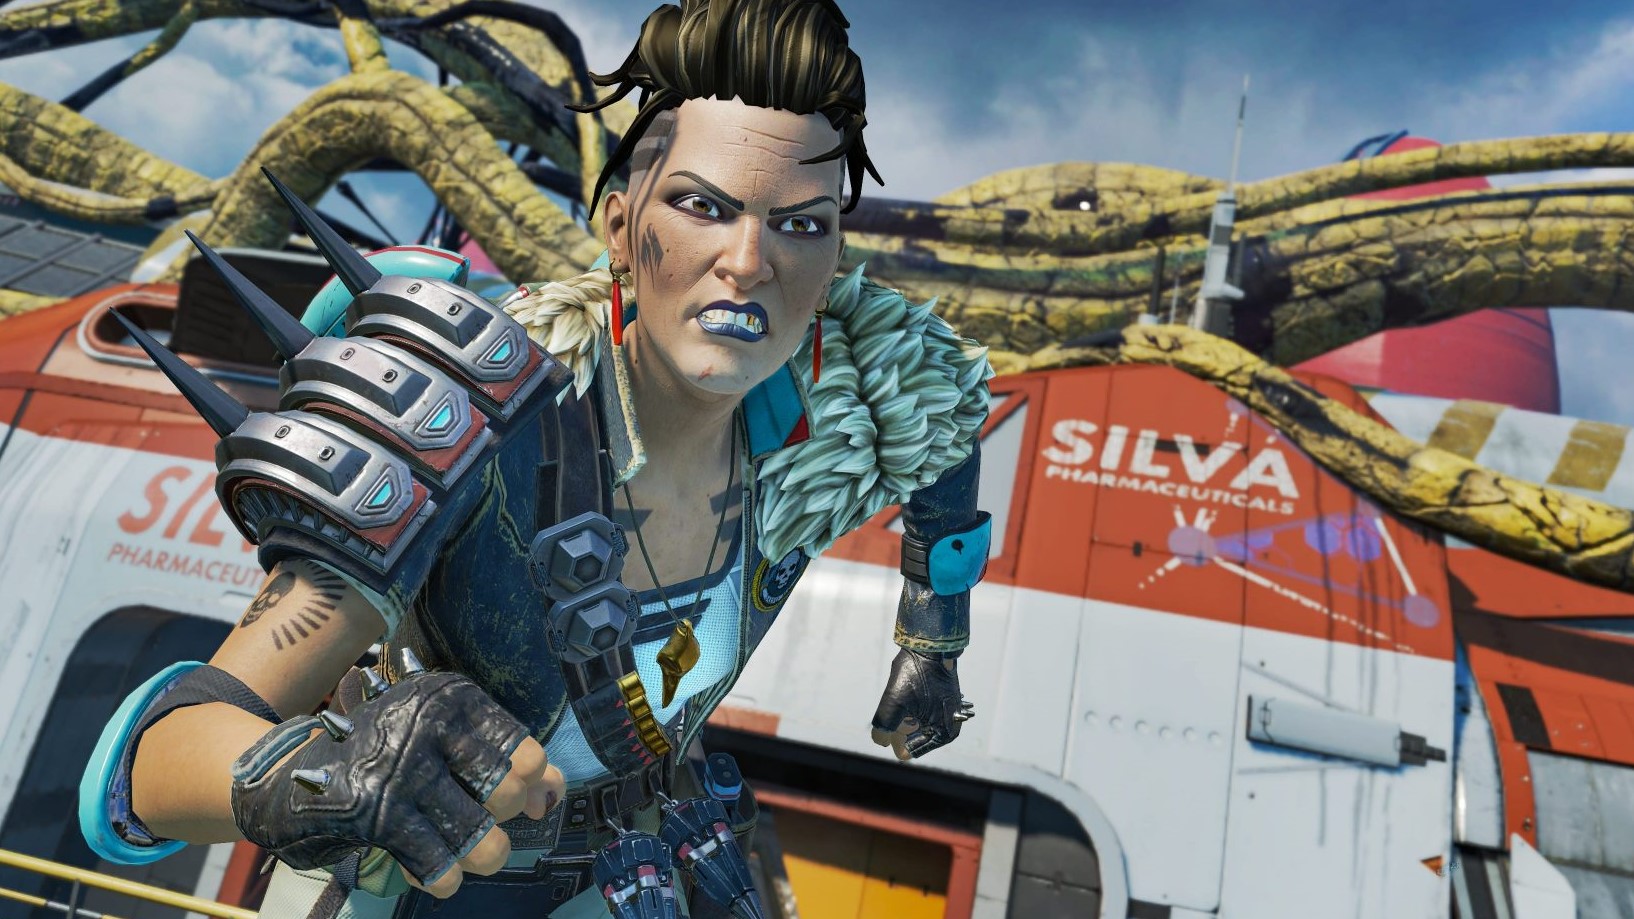  Russian esports teams banned from Apex Legends, FIFA, and Rainbow Six Siege pro leagues 